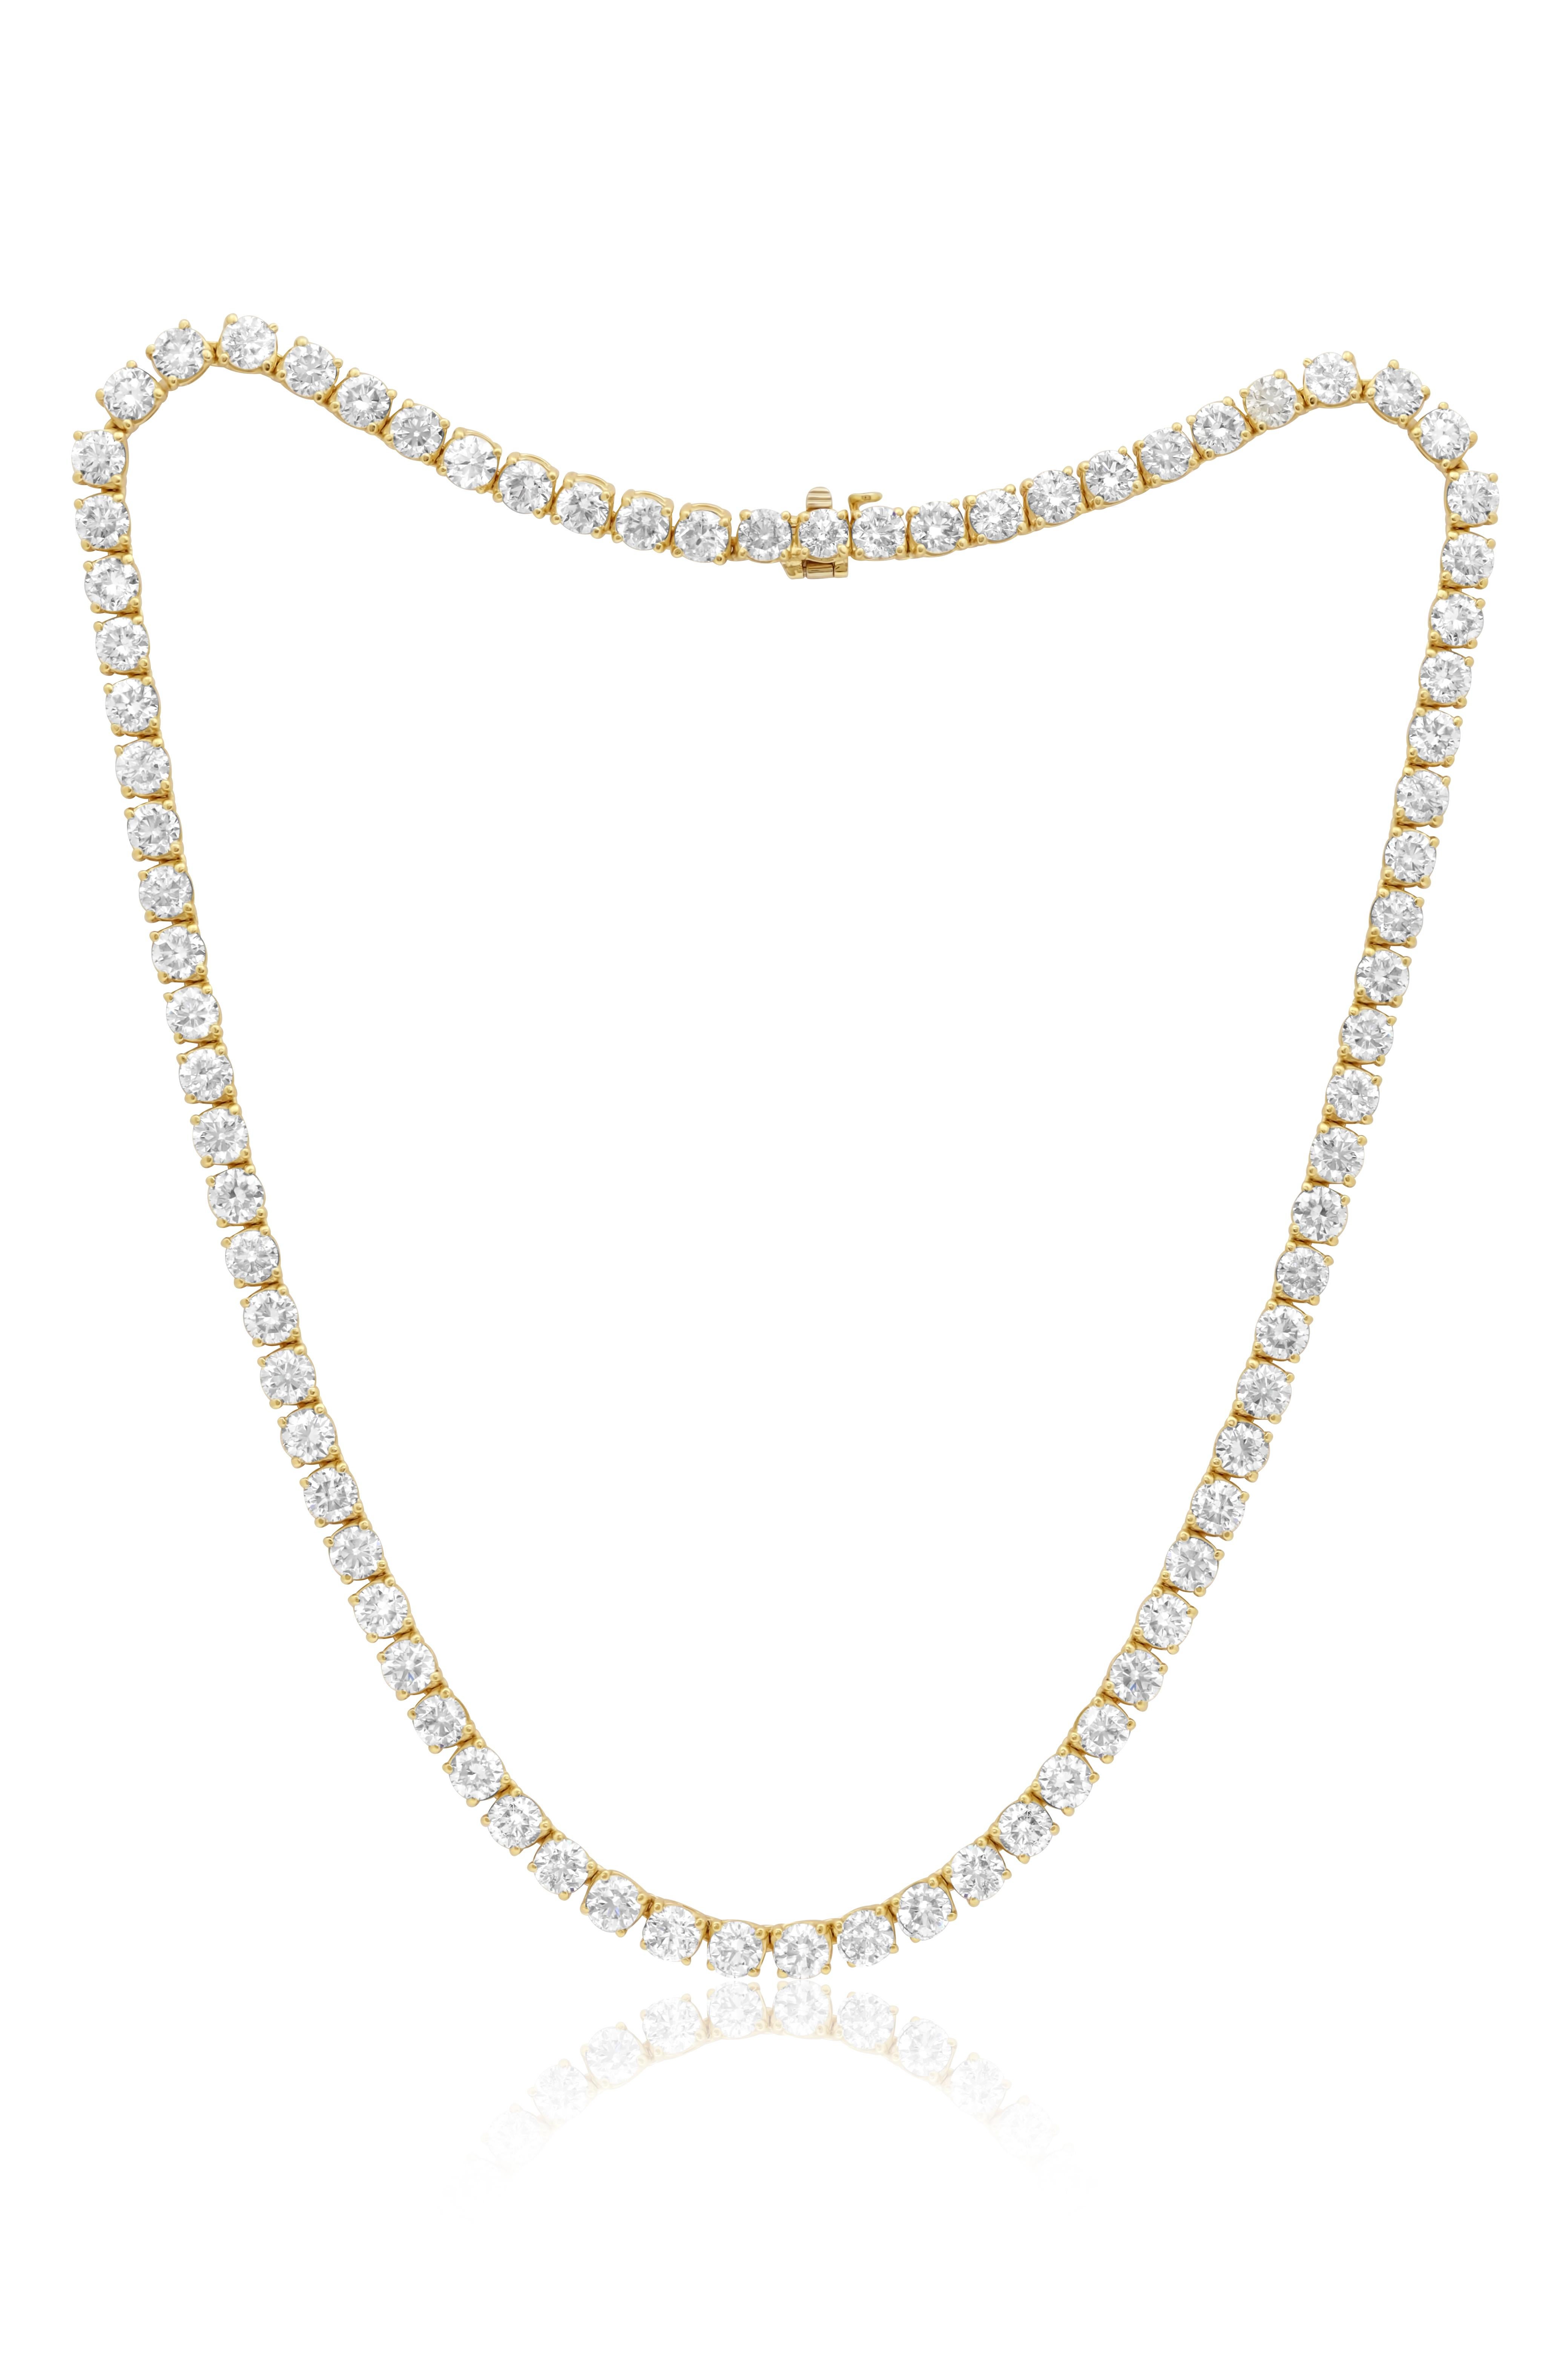 Modern Diana M. Custom 14.05 cts Round 4 Prong Diamond 14k Yellow Gold Tennis Necklace  For Sale